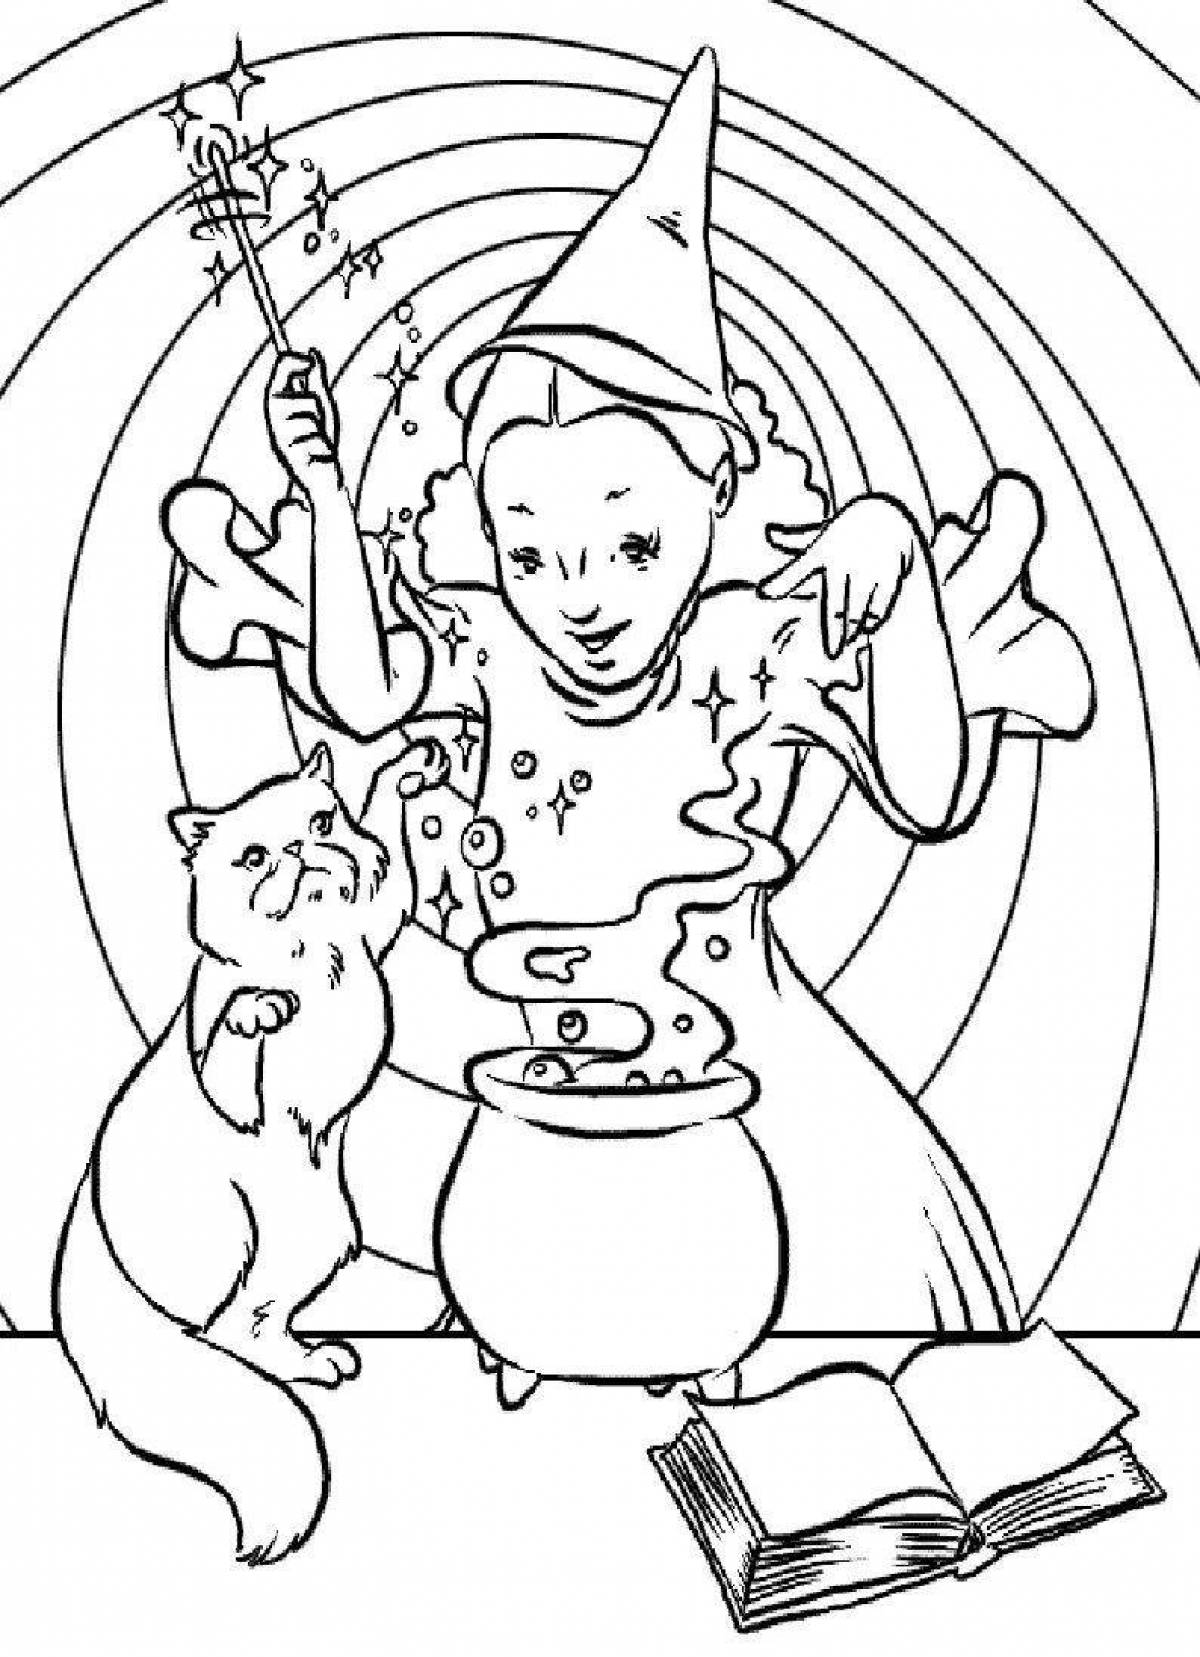 Magic page coloring page